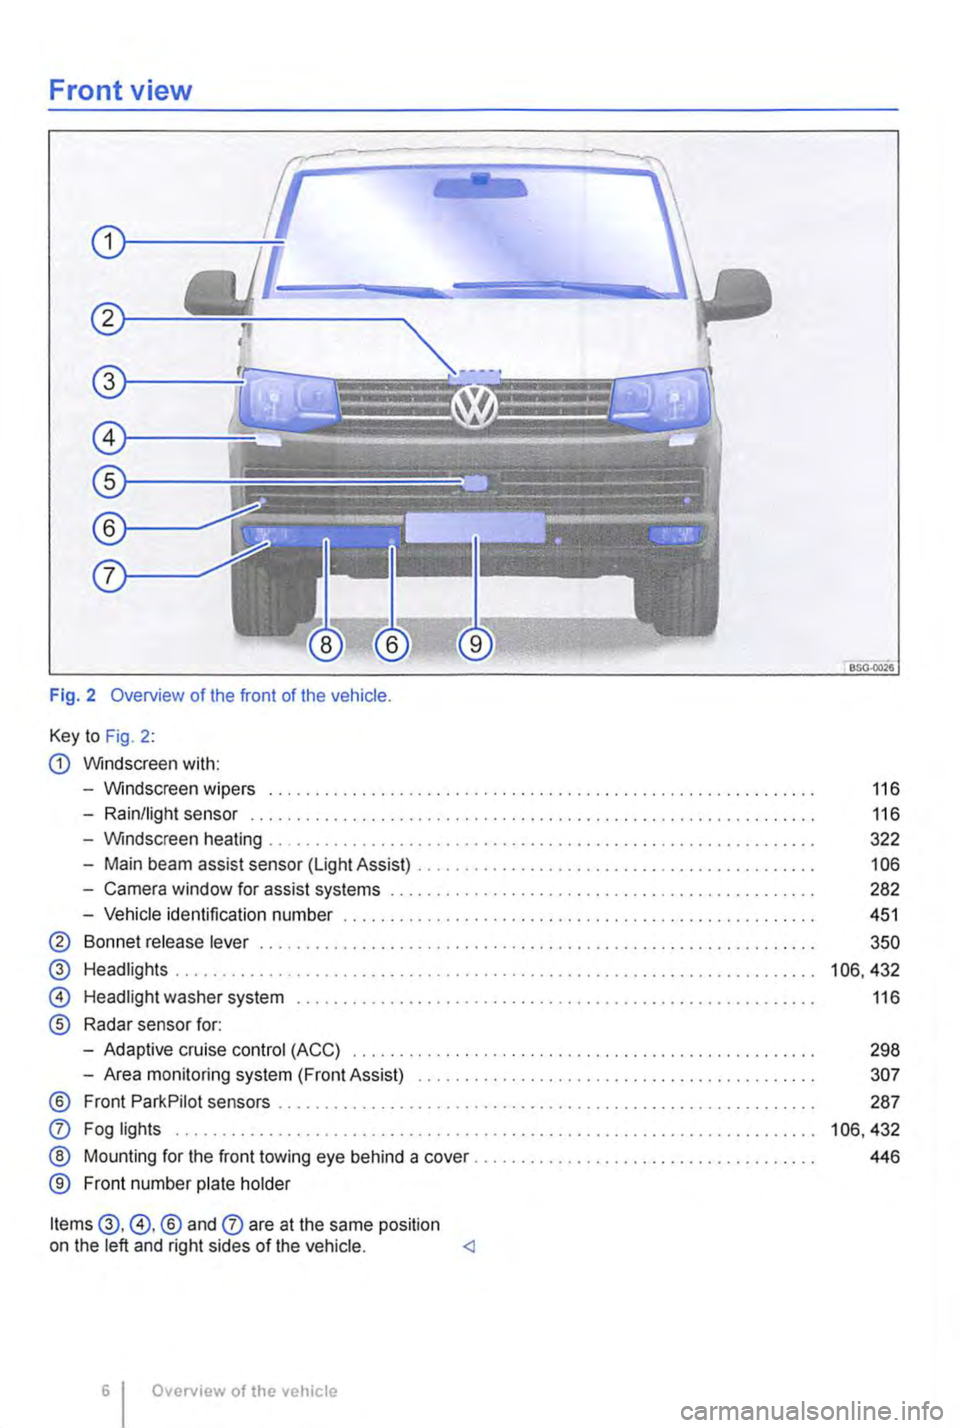 VOLKSWAGEN TRANSPORTER 2020  Owners Manual Front view 
Fig. 2 Overview of the front of the vehicle. 
Key to Fig. 2: 
G) Windscreen with: 
-Windscreen wipers .............. . 
-Rain/light sensor .............. . 
-Windscreen heating 
-Main beam